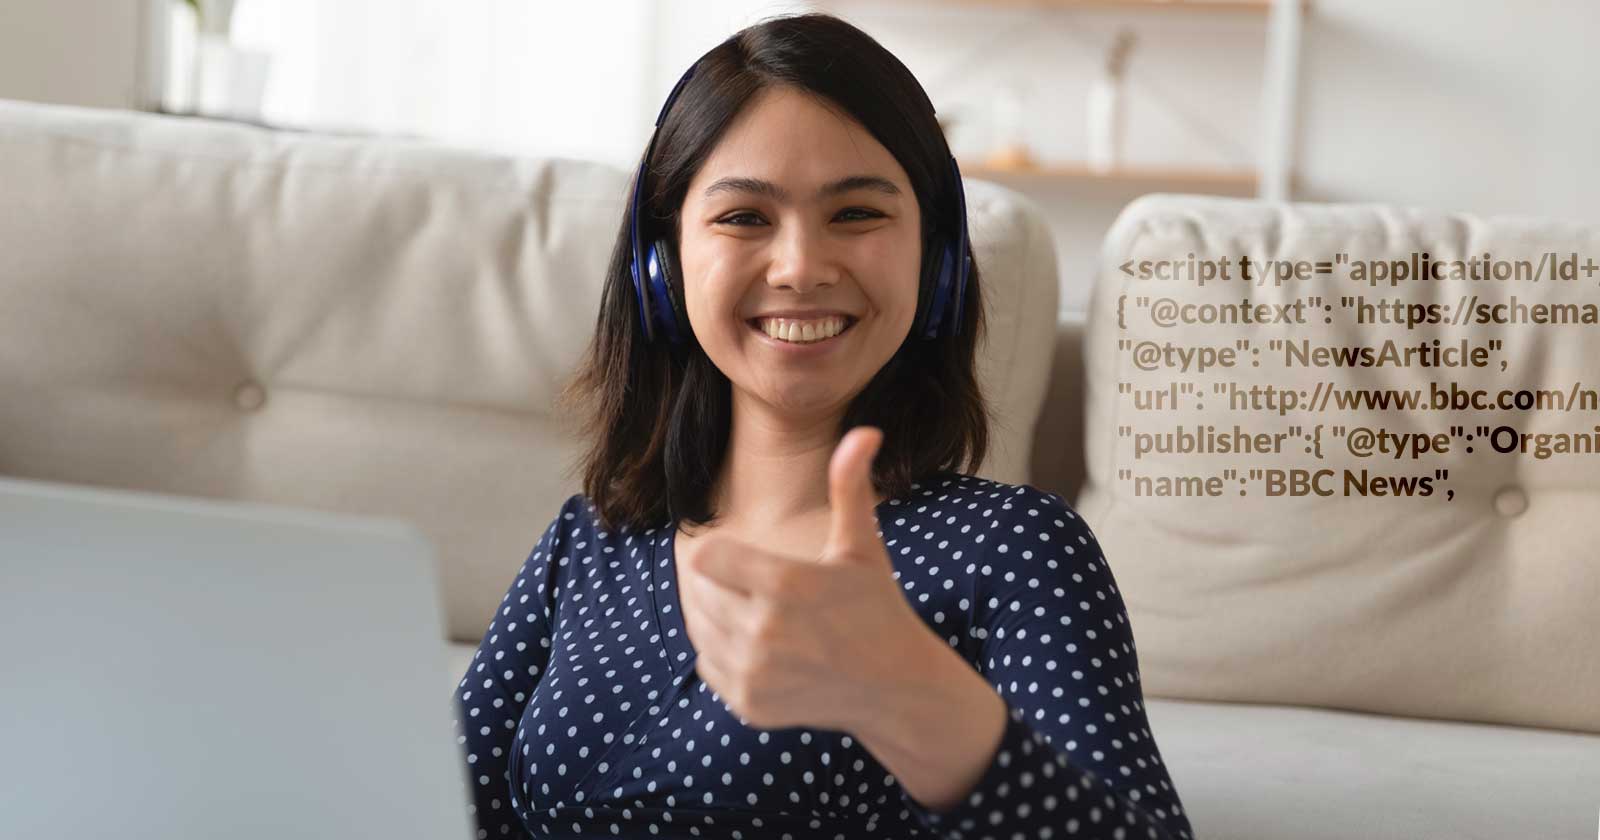 Image of a woman giving thumbs up with structured data projected behind her